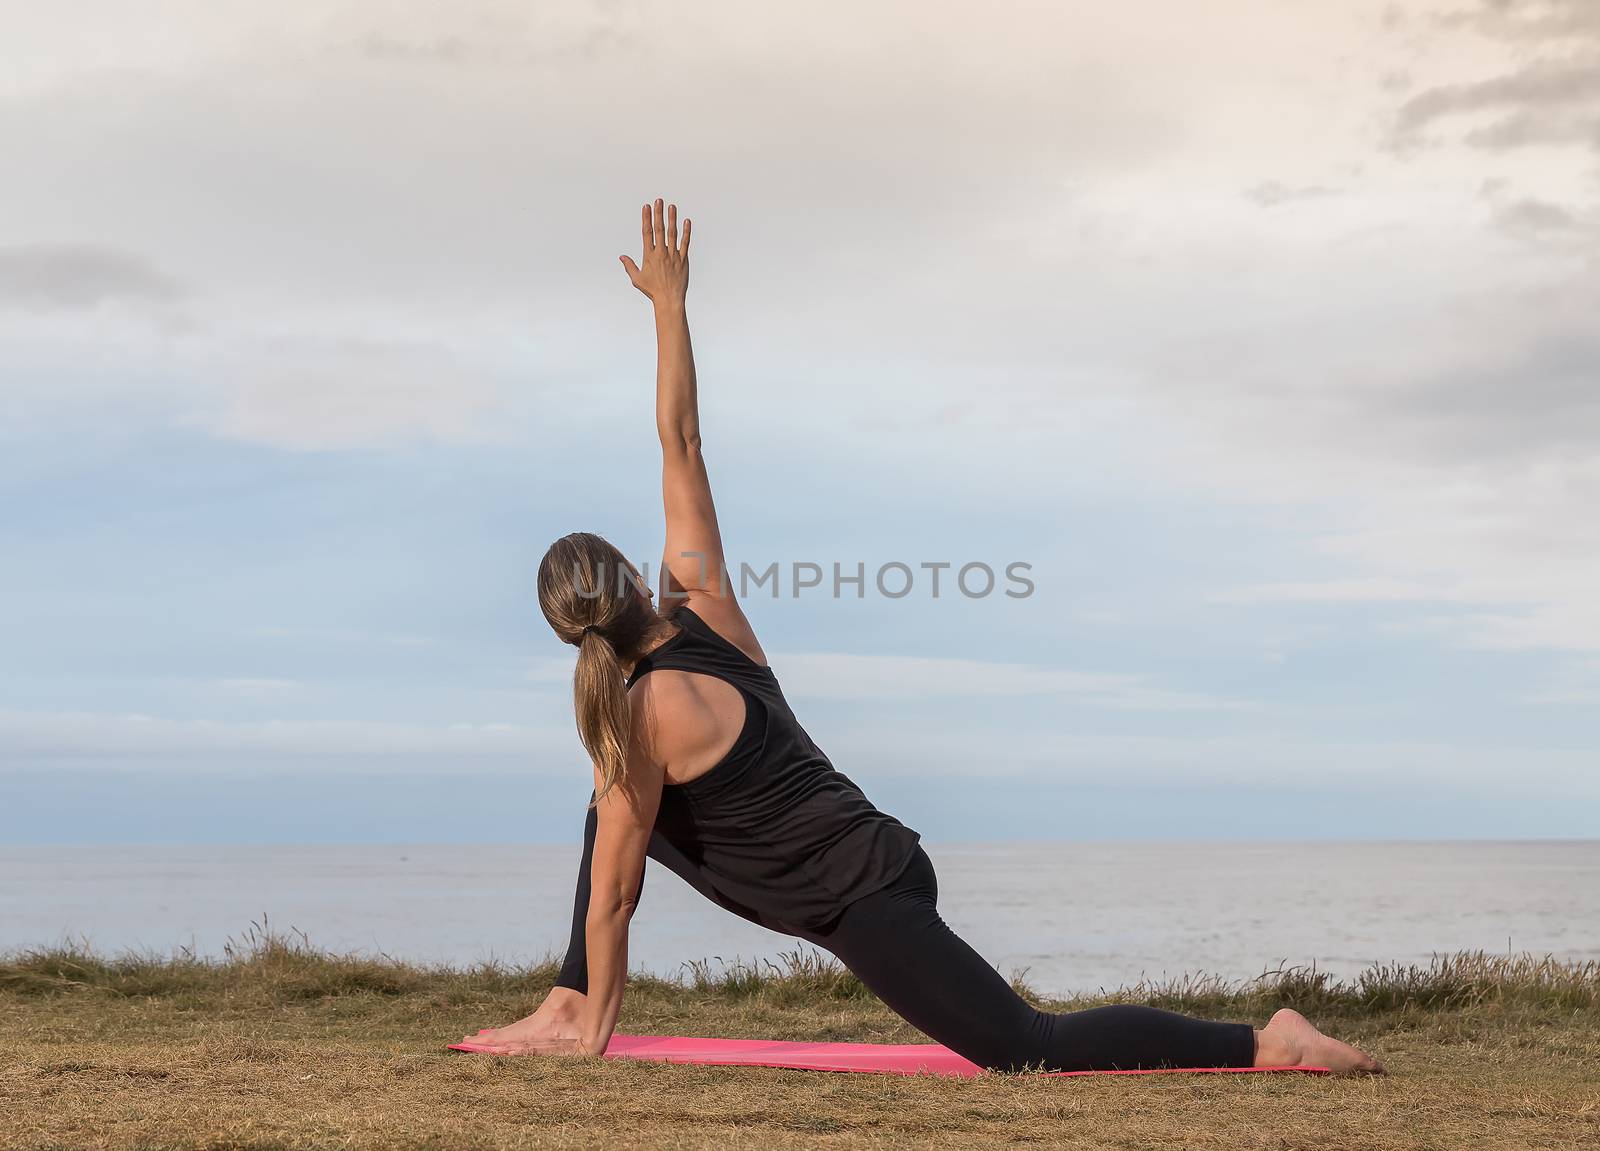 Woman in sportswear stretching outdoors on a pink mat with the sea in the background.